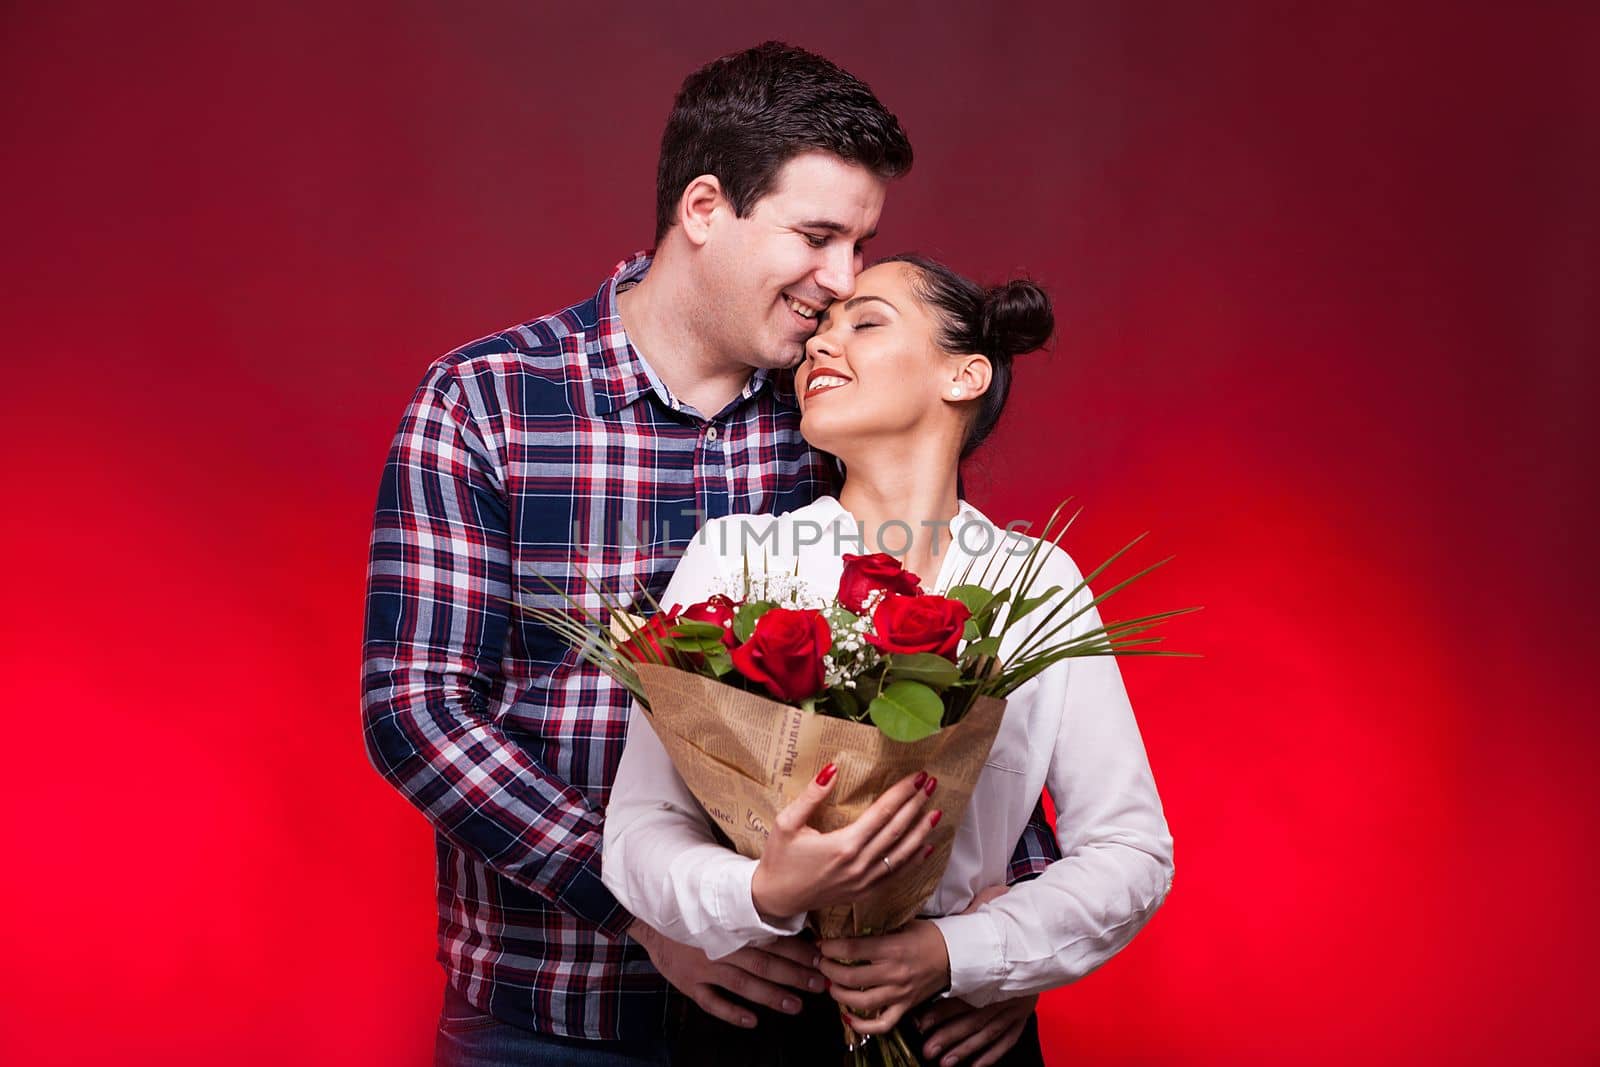 Man embracing her wife and kissing her on the forehead while she holds a roses bouquet in hands on red background in studio photo